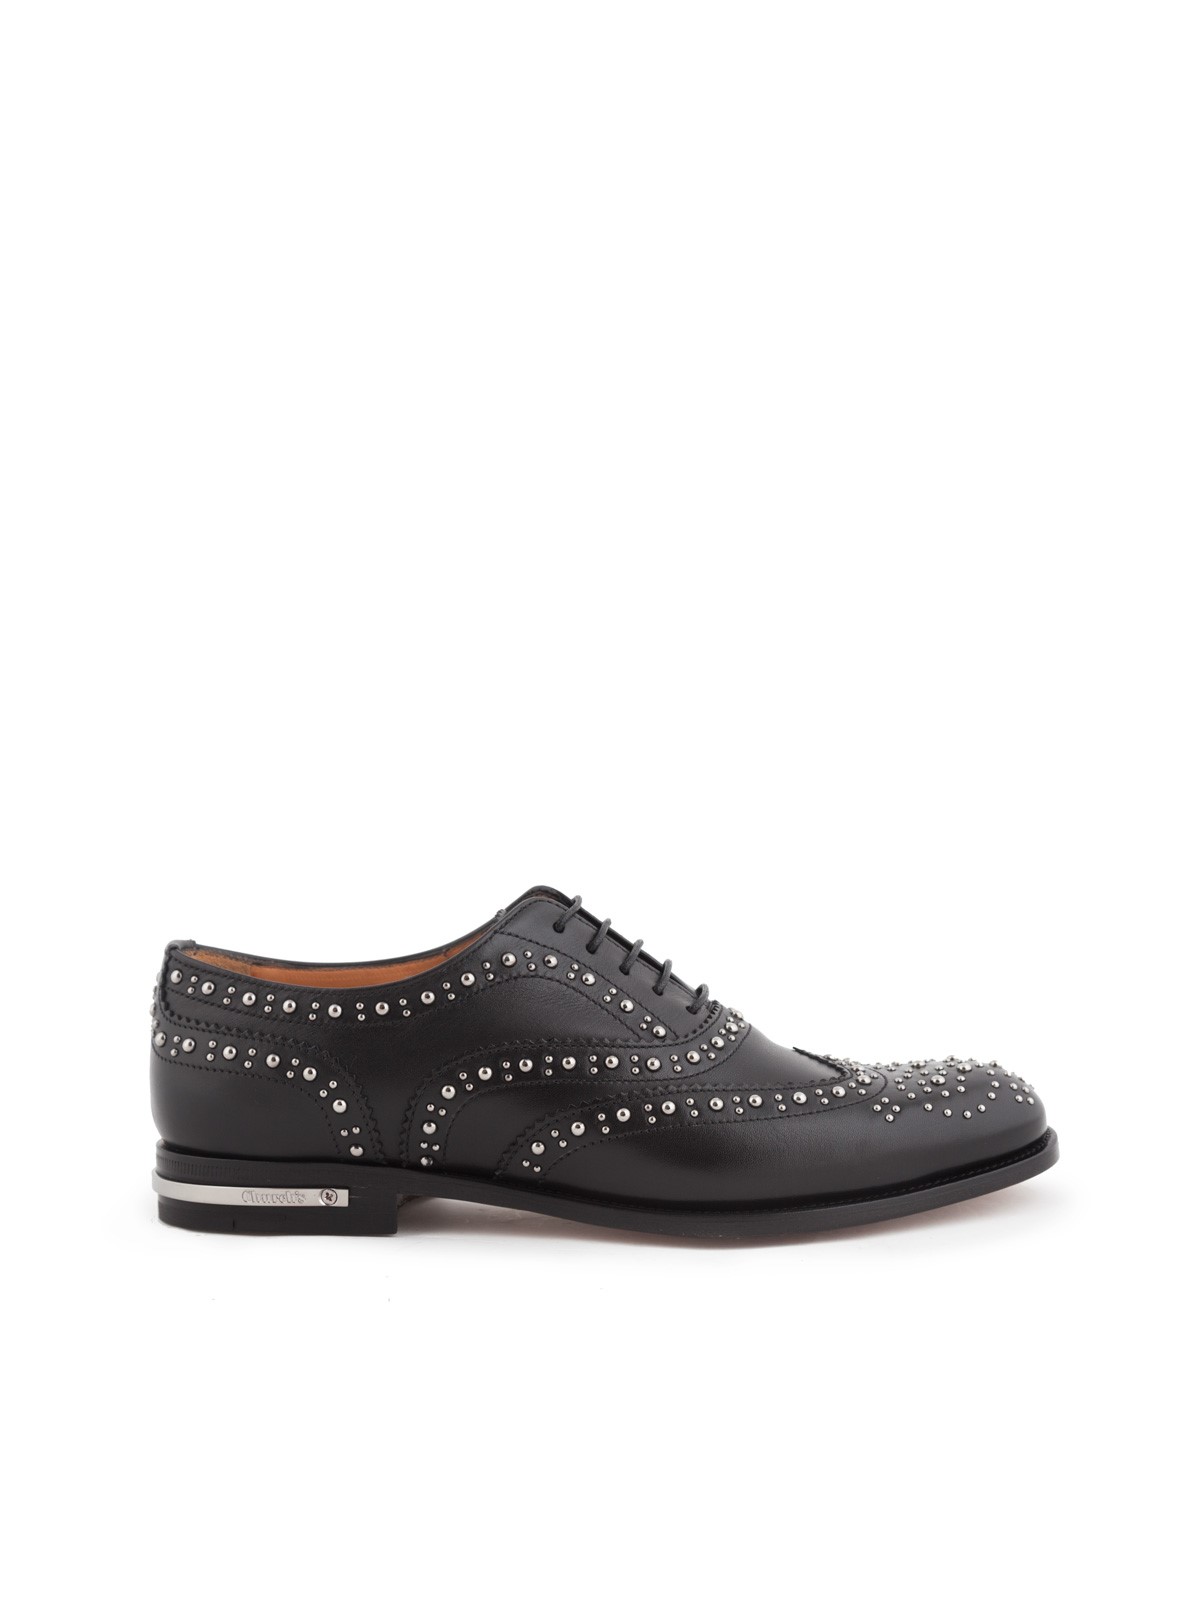 church's STUDDED OXFORD SHOES available 